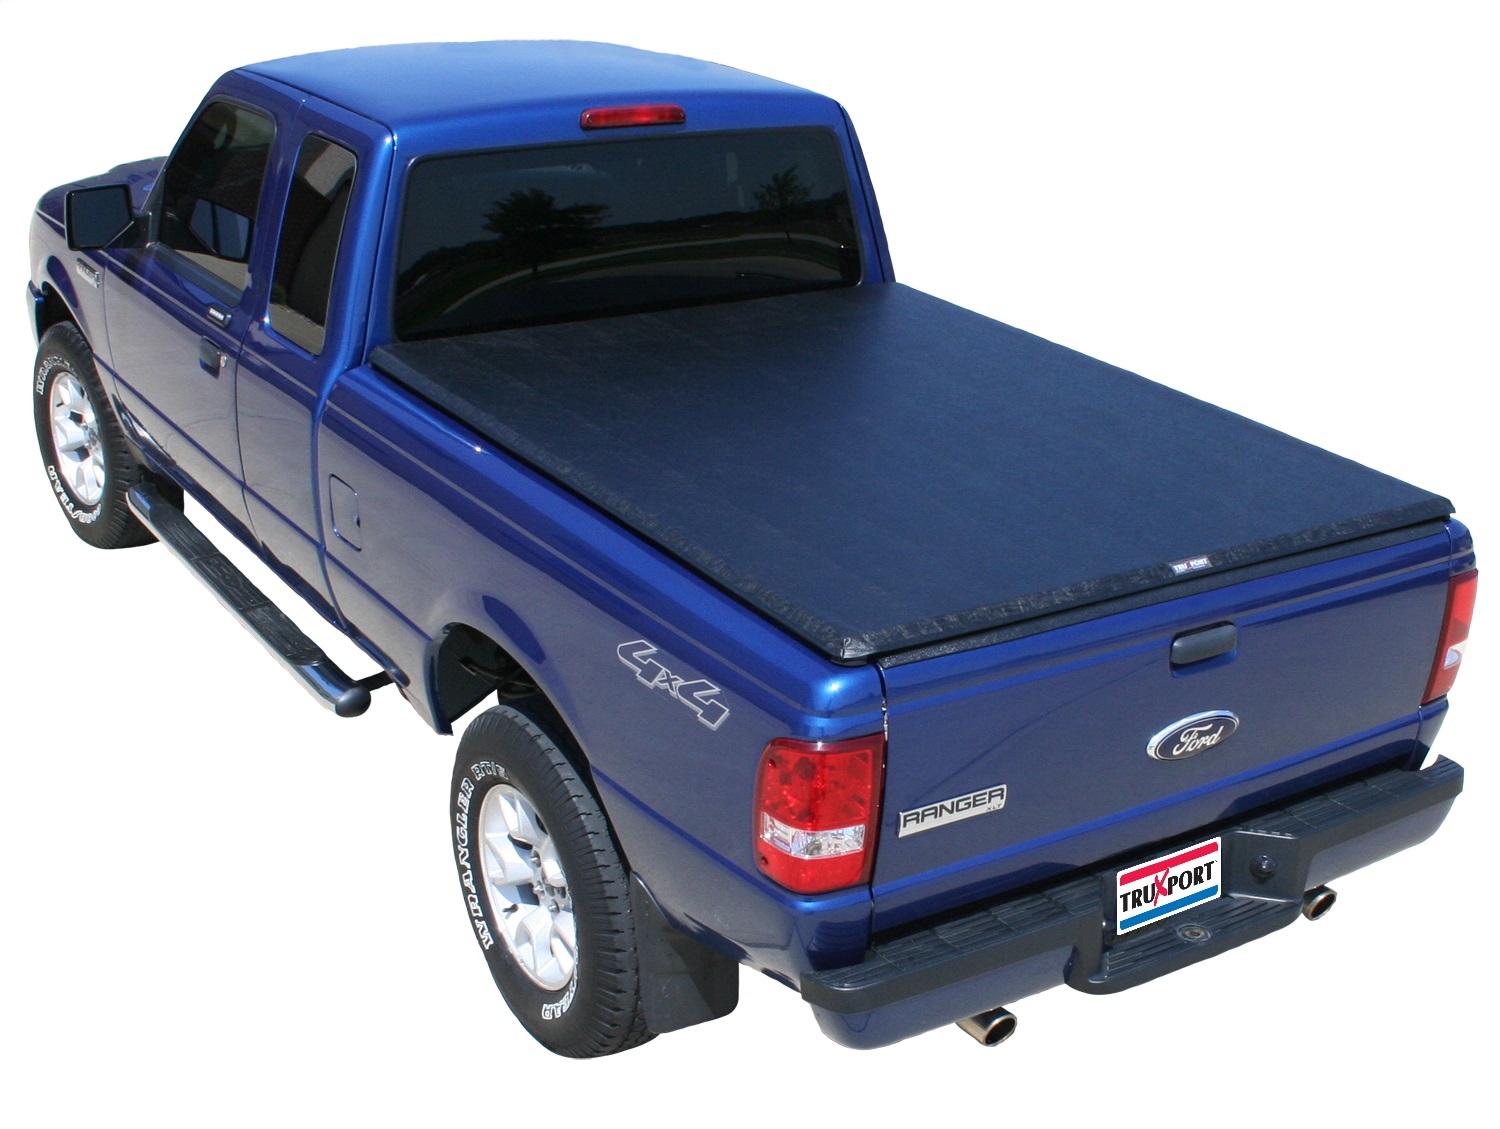 2010 Ford ranger accessories canada #9